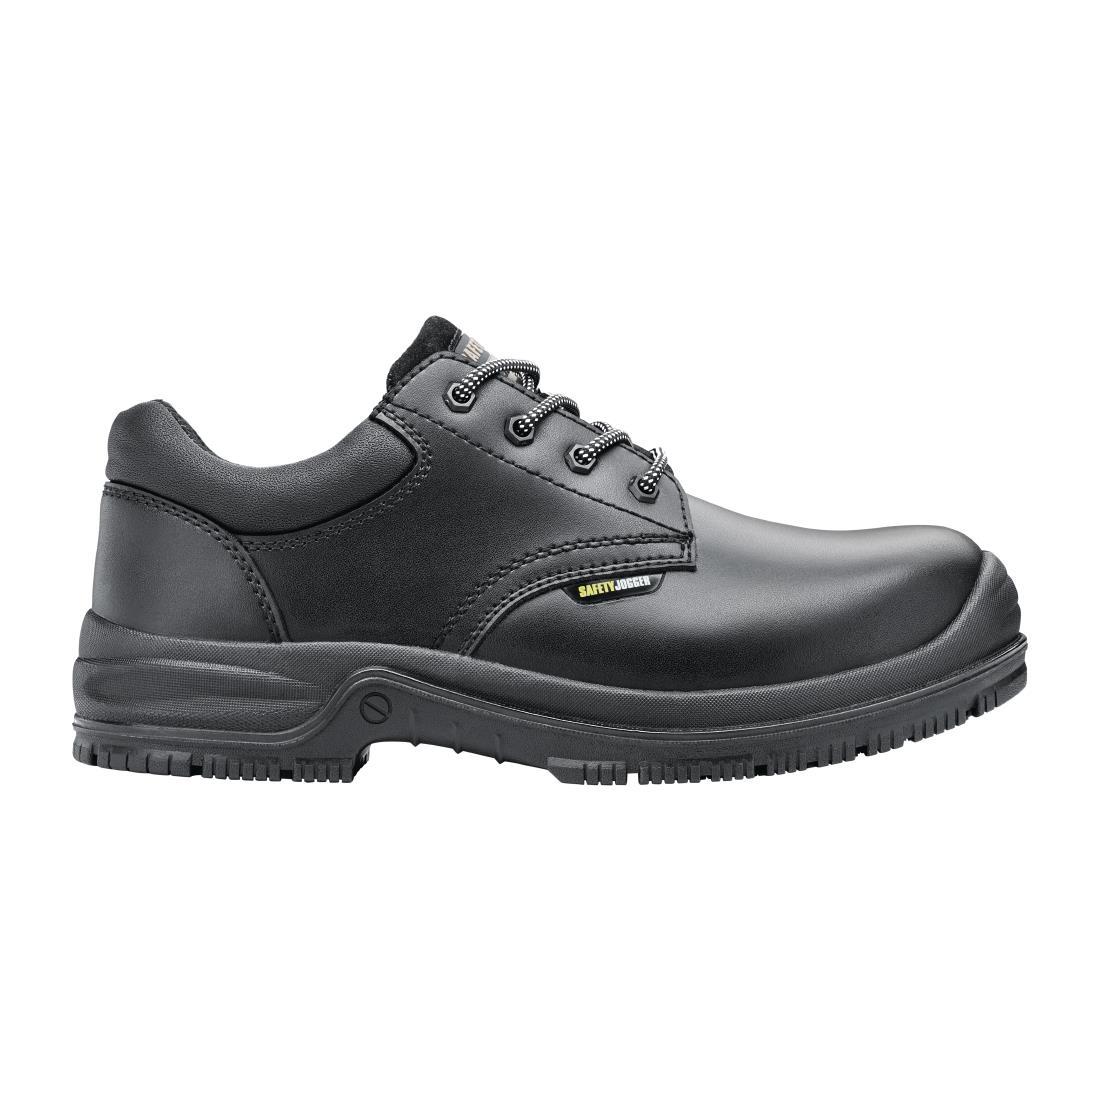 Shoes for Crews X111081 Safety Shoe Black Size 39 - BB596-39  - 1